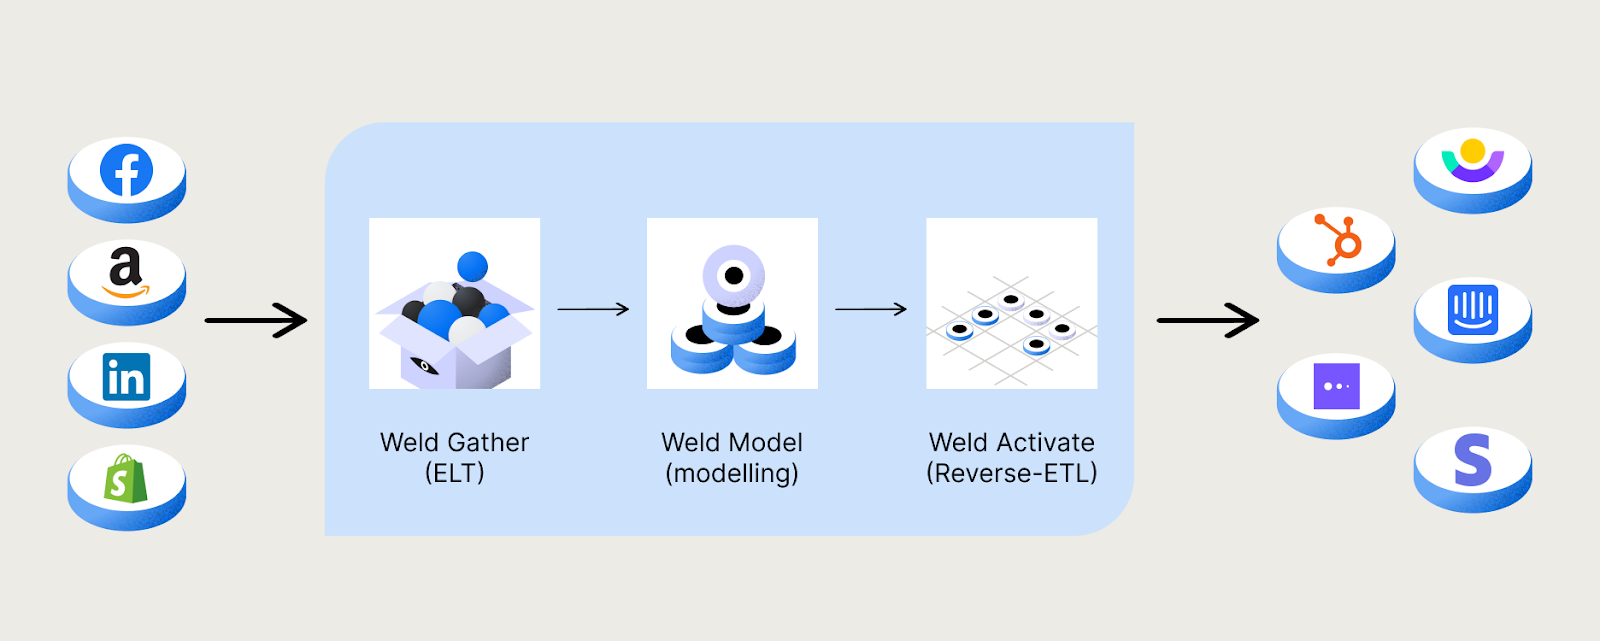 Weld's platform that centralizes ELT, data modelling, and reverse-ETL in one space